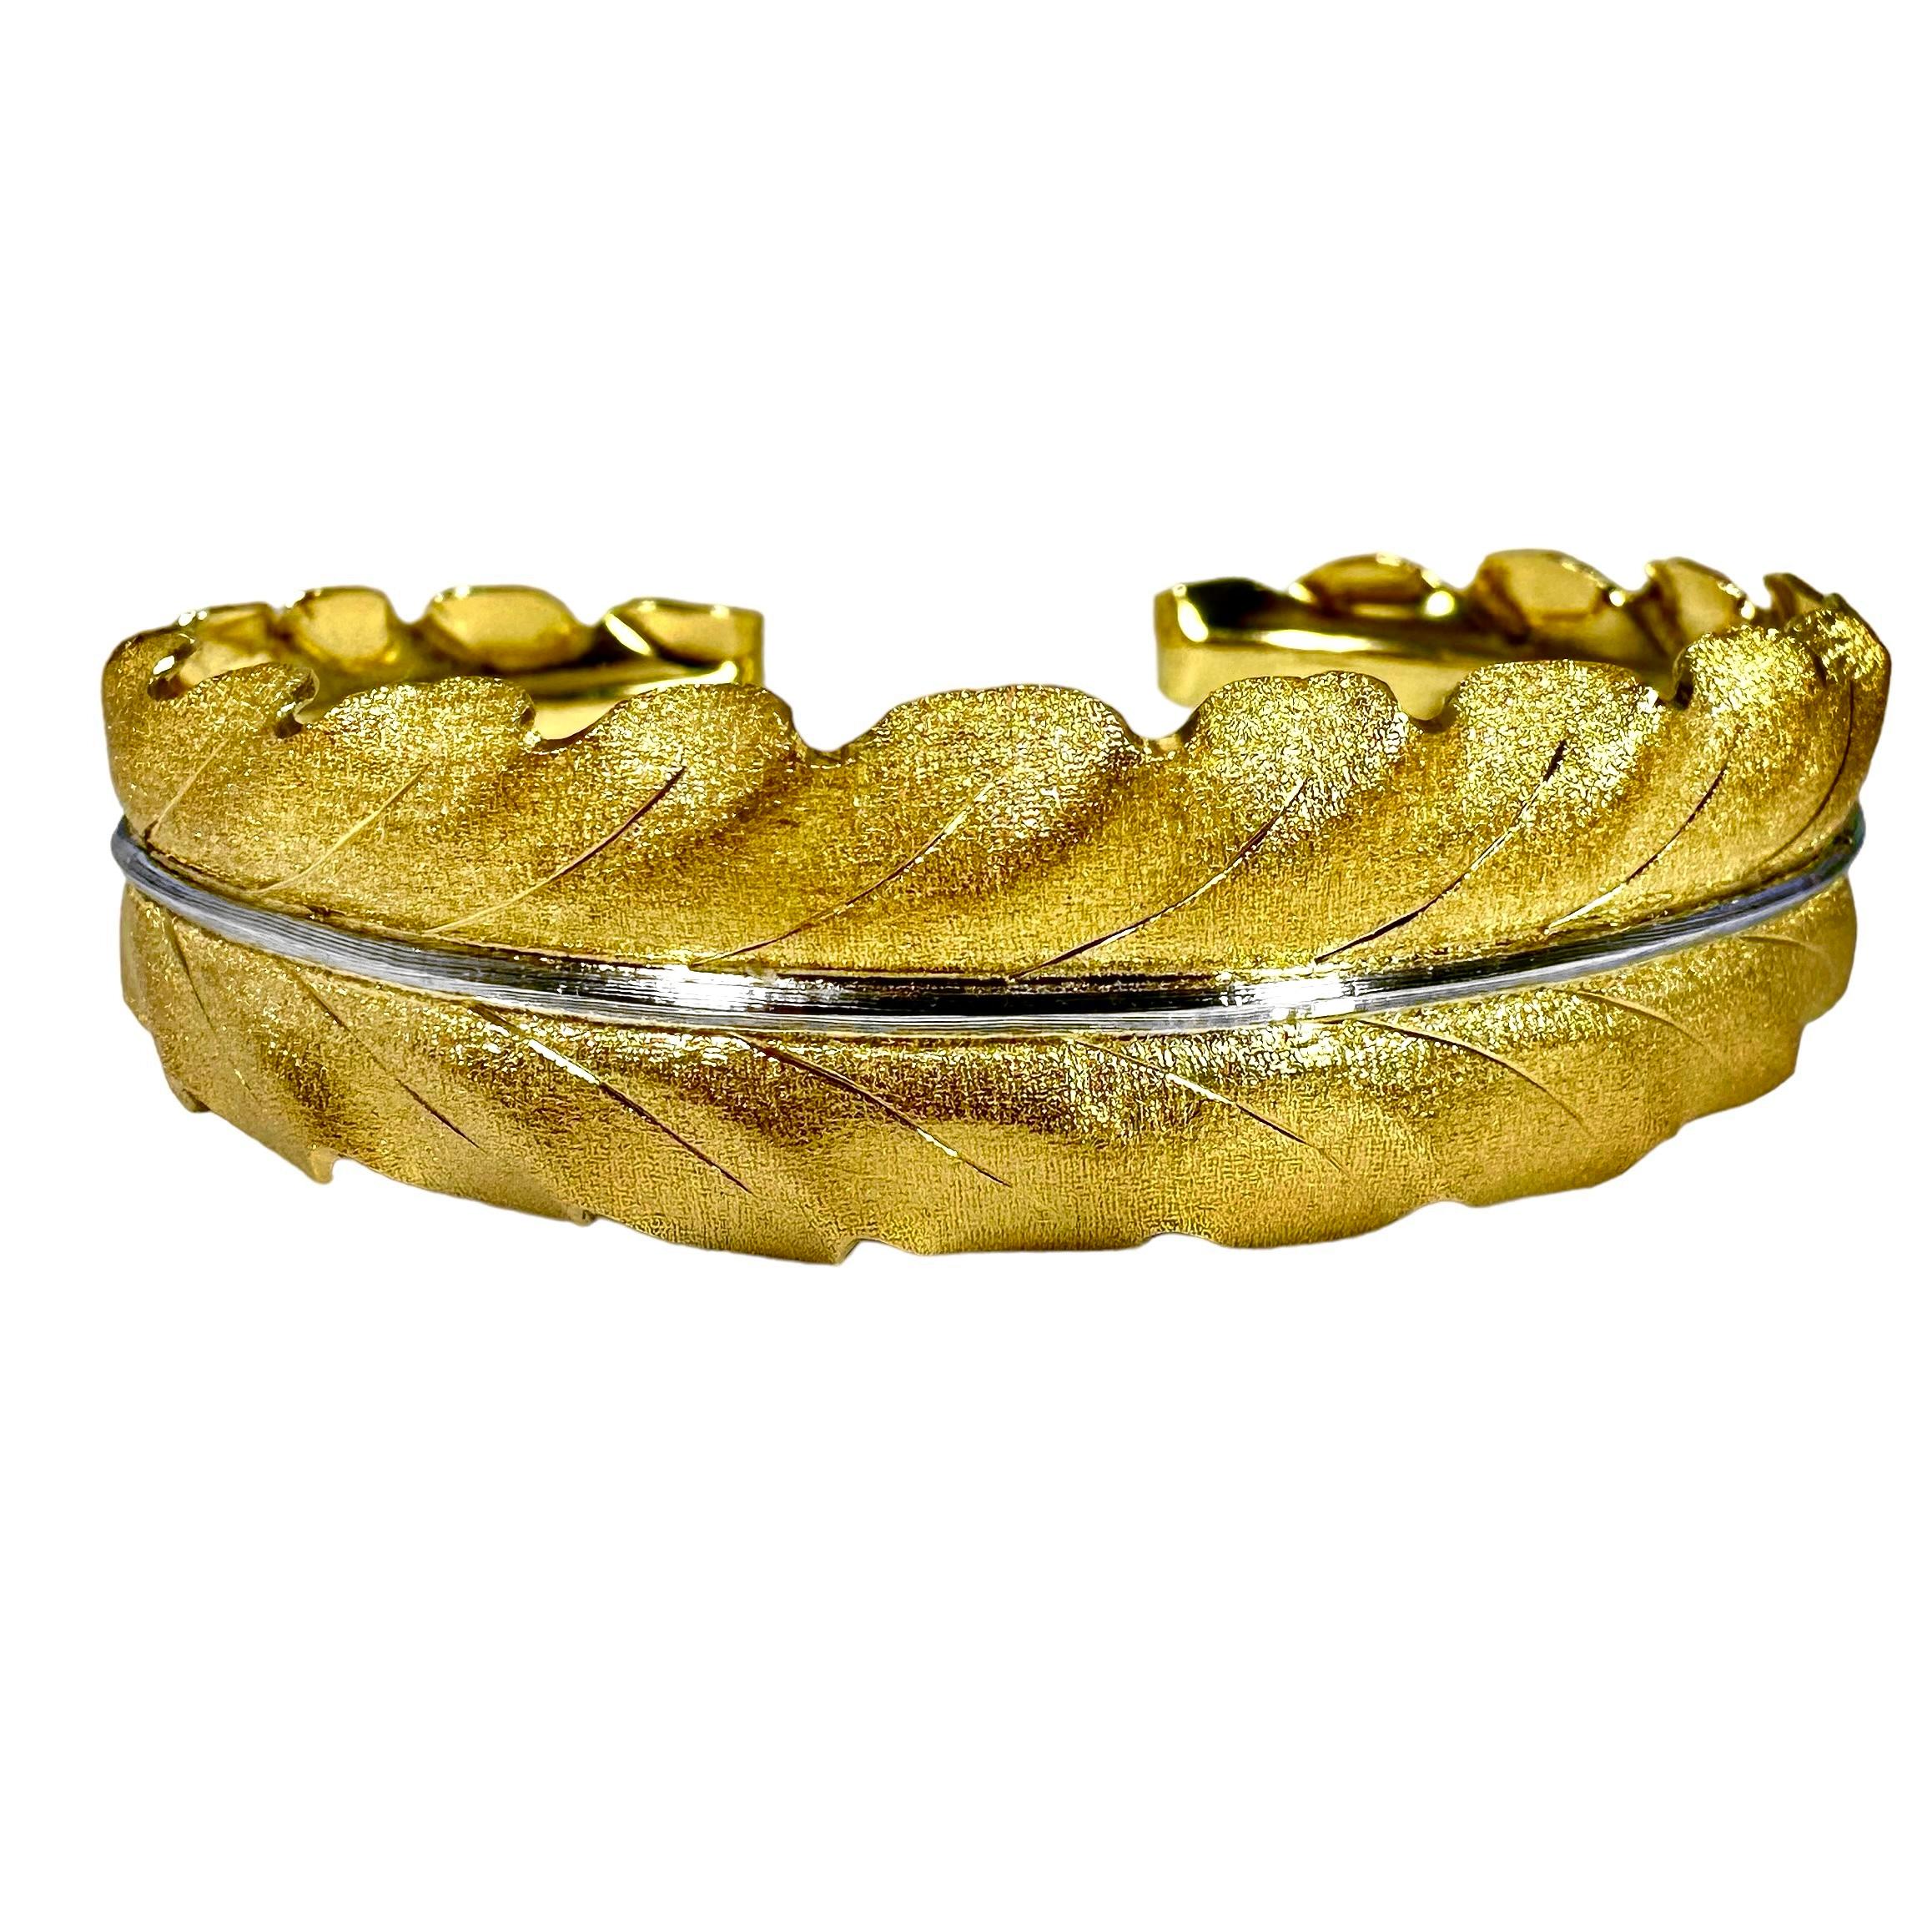 This classic Mario Buccellati Laurel Leaf bangle bracelet is deftly crafted in his characteristic, textured 18k yellow gold surface, and with an 18k white gold center vein. This model is a perennial item in Buccellati's line. It is made to fit a